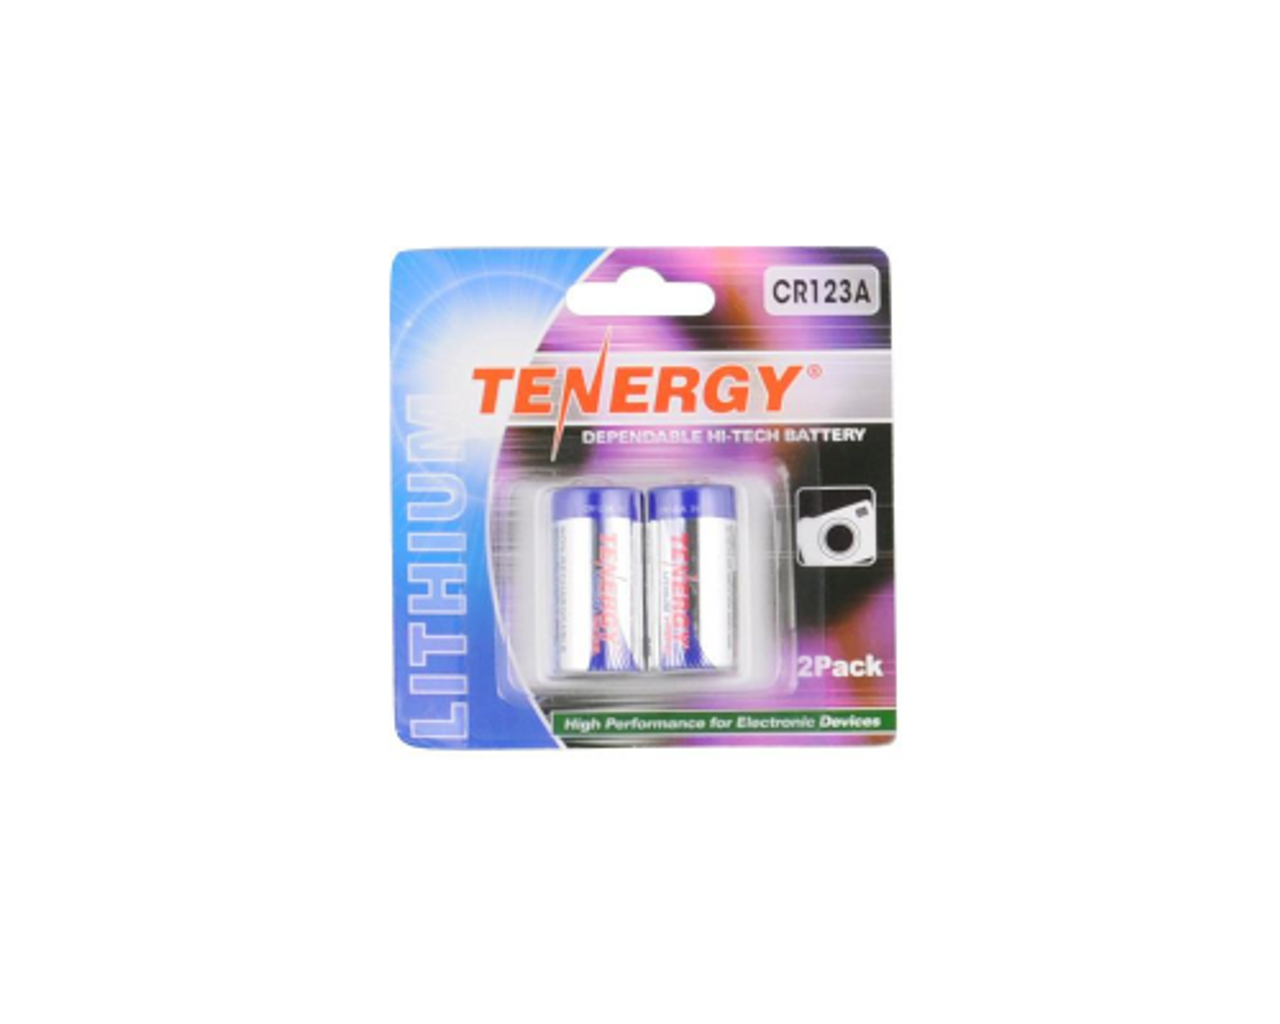 Tenergy Lithium CR123A 3V Propel Primary Battery (w/PTC) - 2 Pack –